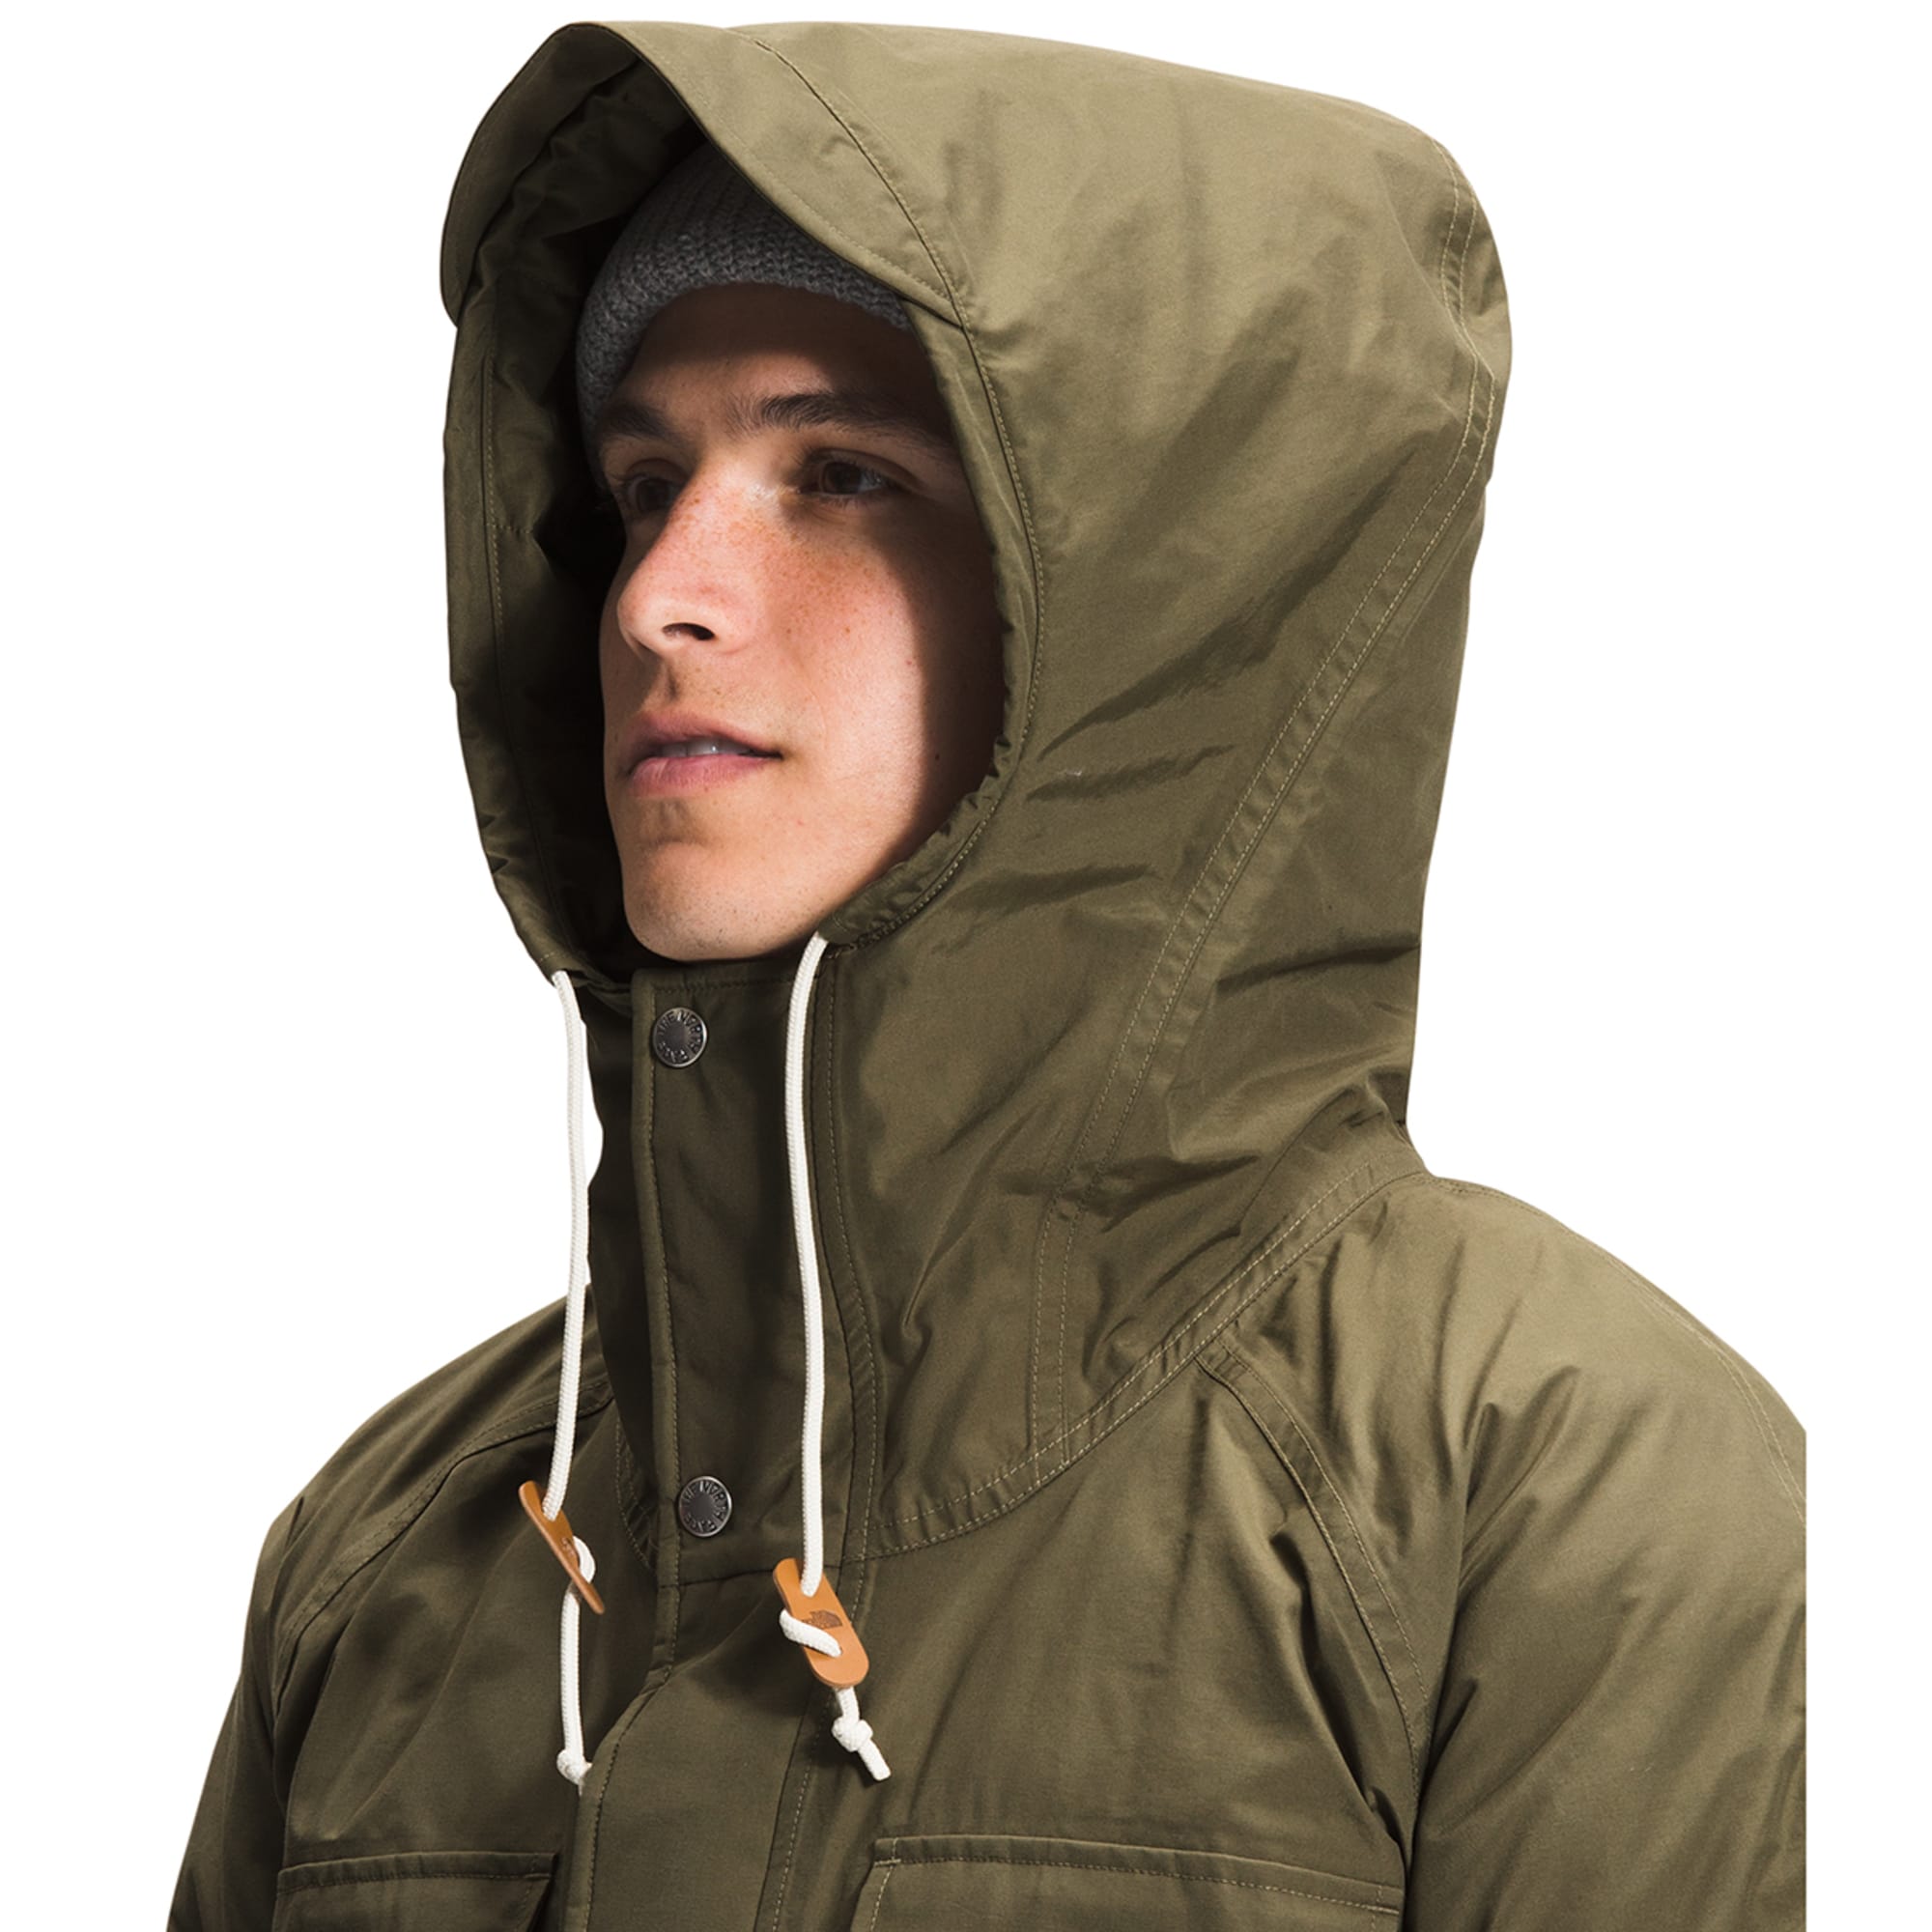 THE NORTH FACE Men's Thermoball Dryvent Mountain Parka Winter